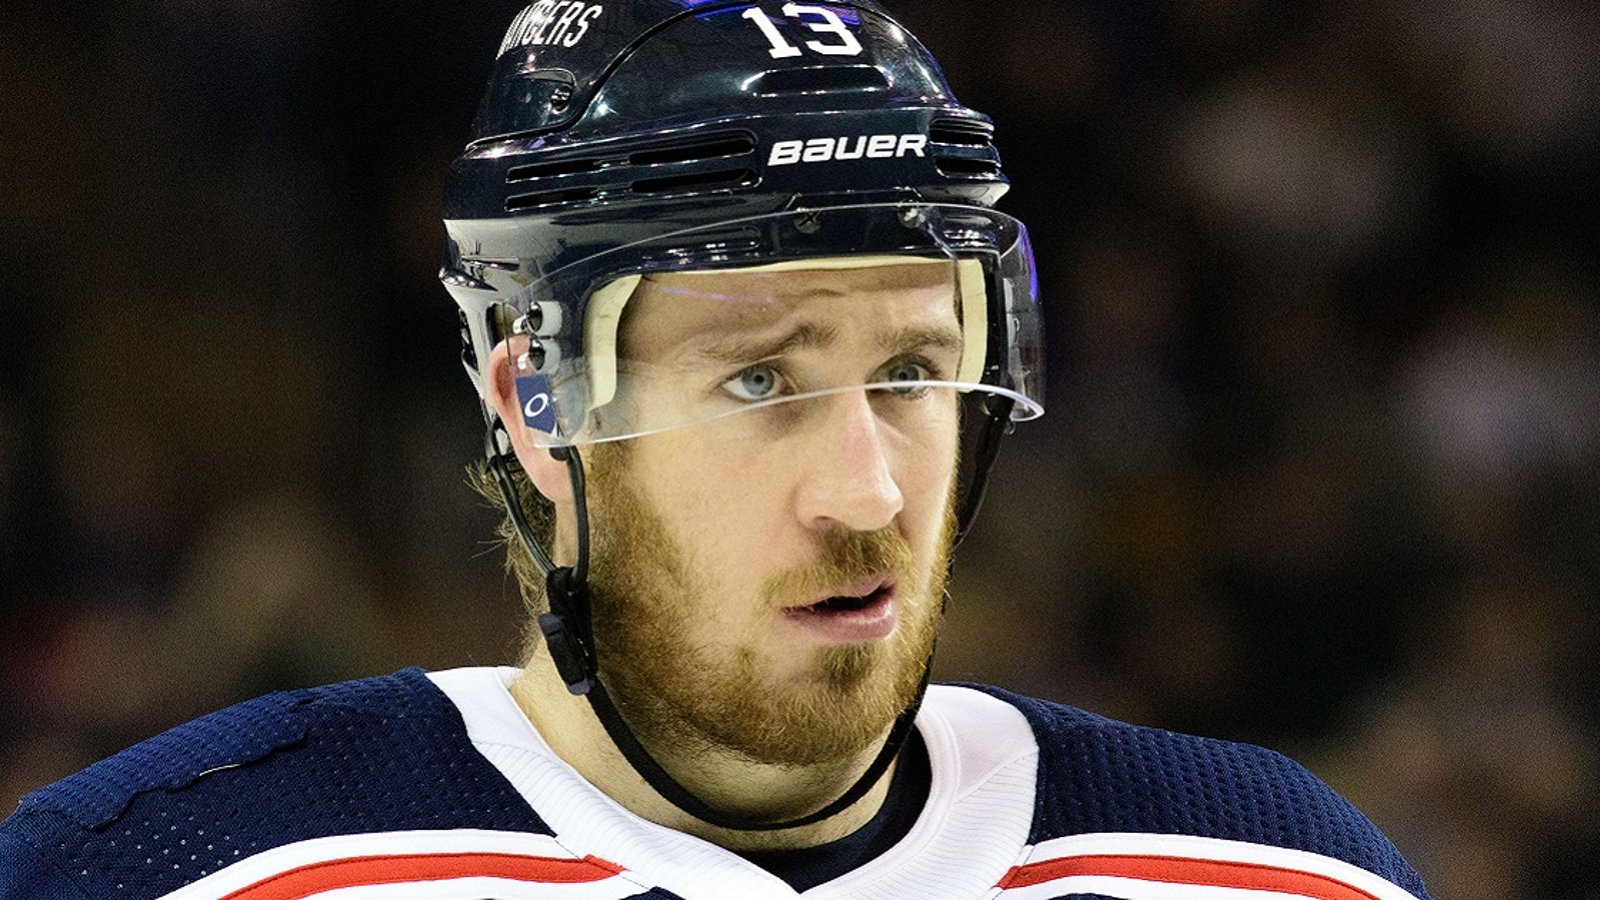 Rumor: Kevin Hayes will not sign with the Flyers, has “mutual interest” with another team.